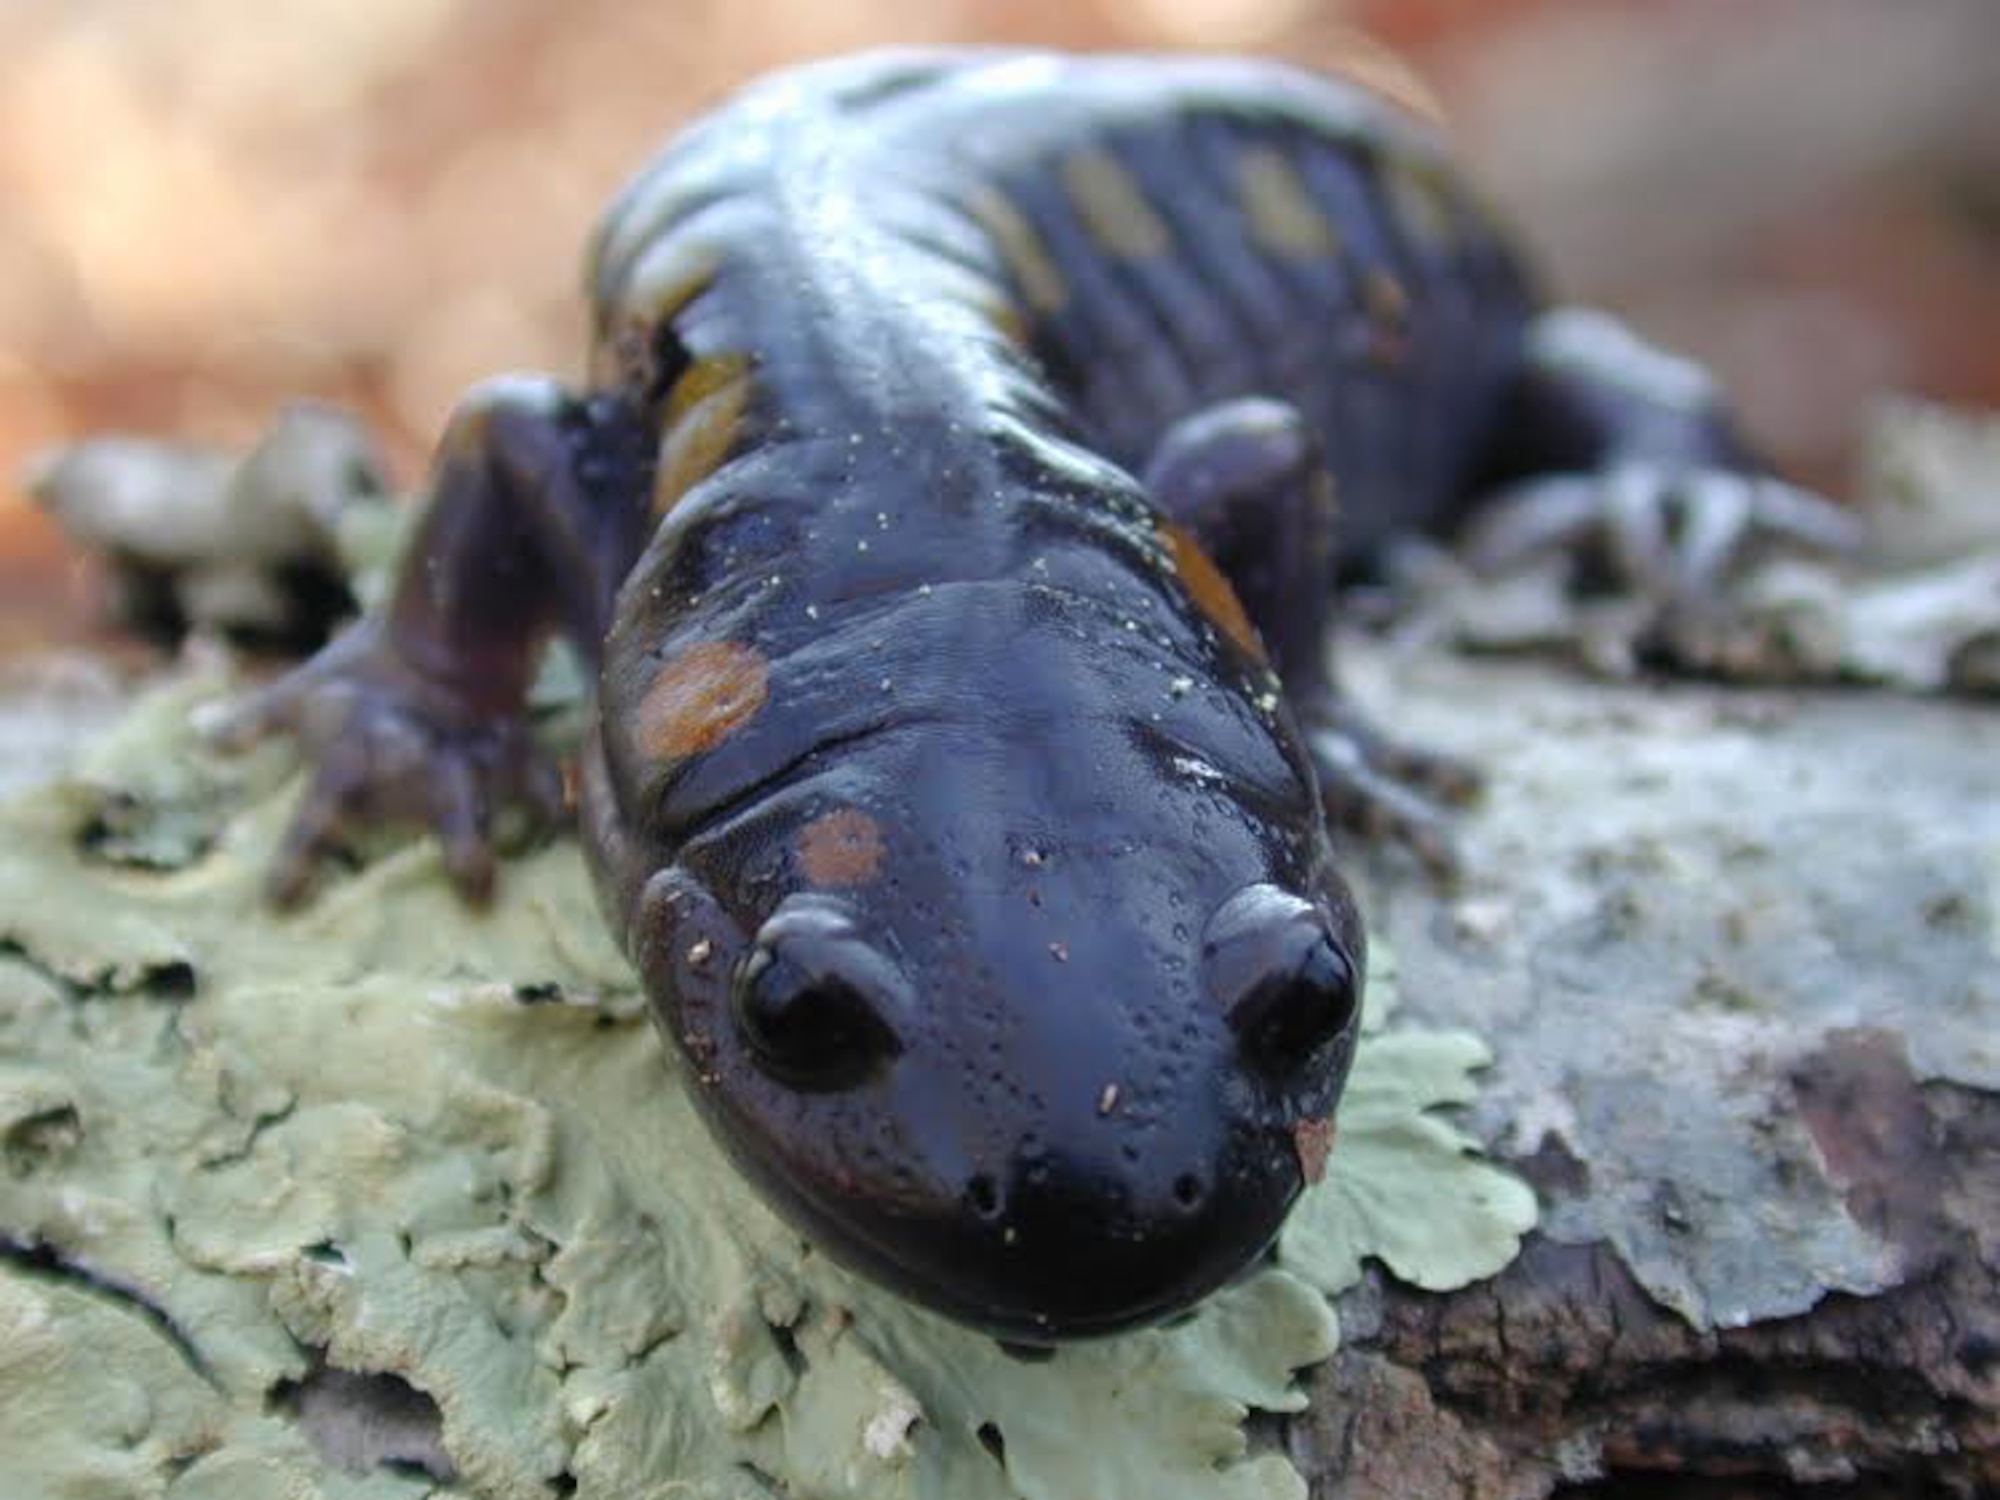 A spotted salamander sits among the lichen at Sinking Pond on Arnold Air Force Base, Tenn. Amphibian counts are conducted across Arnold AFB. Information gathered from these surveys supports existing knowledge of populations and provides a long-term view of what is occurring population-wise with a particular species or community, which helps the base Natural Resource team make informed decisions. (U.S. Air Force photo)